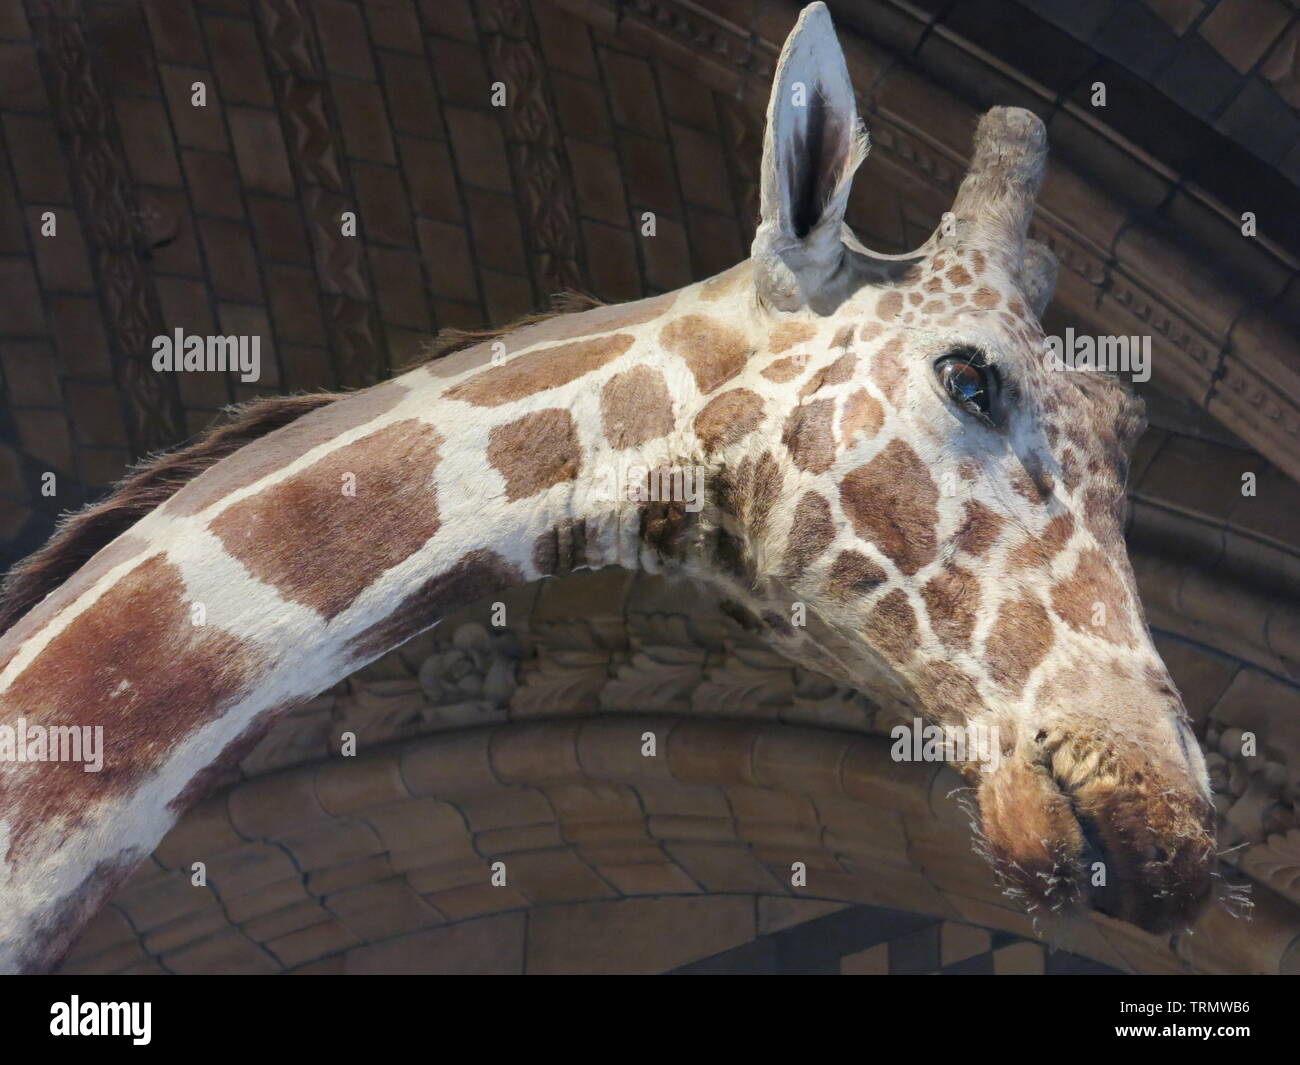 Close-up of the head and neck of a tall giraffe, one of the stuffed creatures preserved at London's Natural History Museum Stock Photo